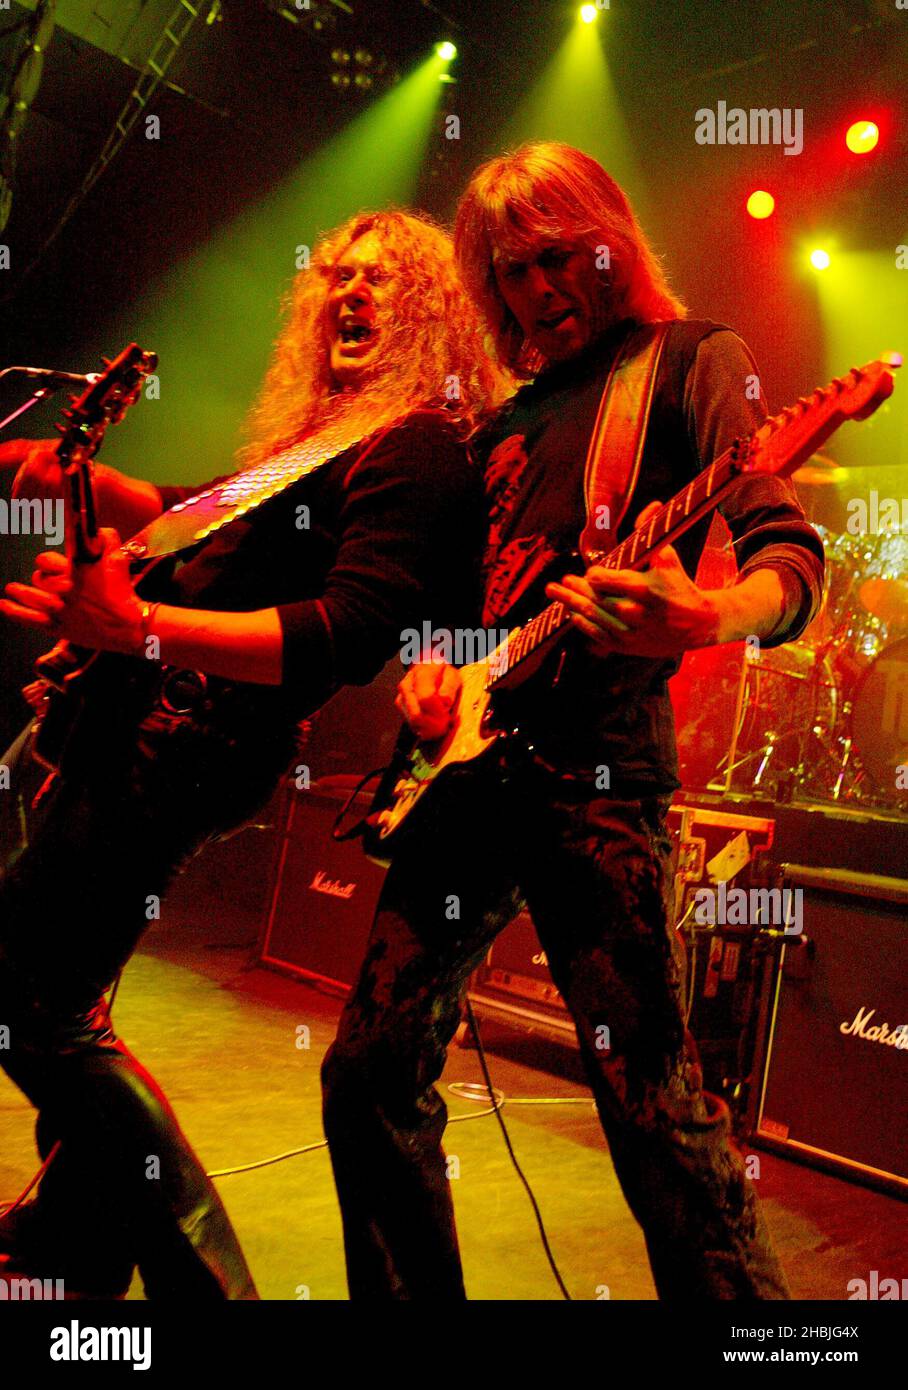 Scott Gorham vocalist and John Sykes original guitarist of rock band Thin Lizzy performs on stage during London date of their UK tour, at the Shepherds Bush Empire in London. Stock Photo